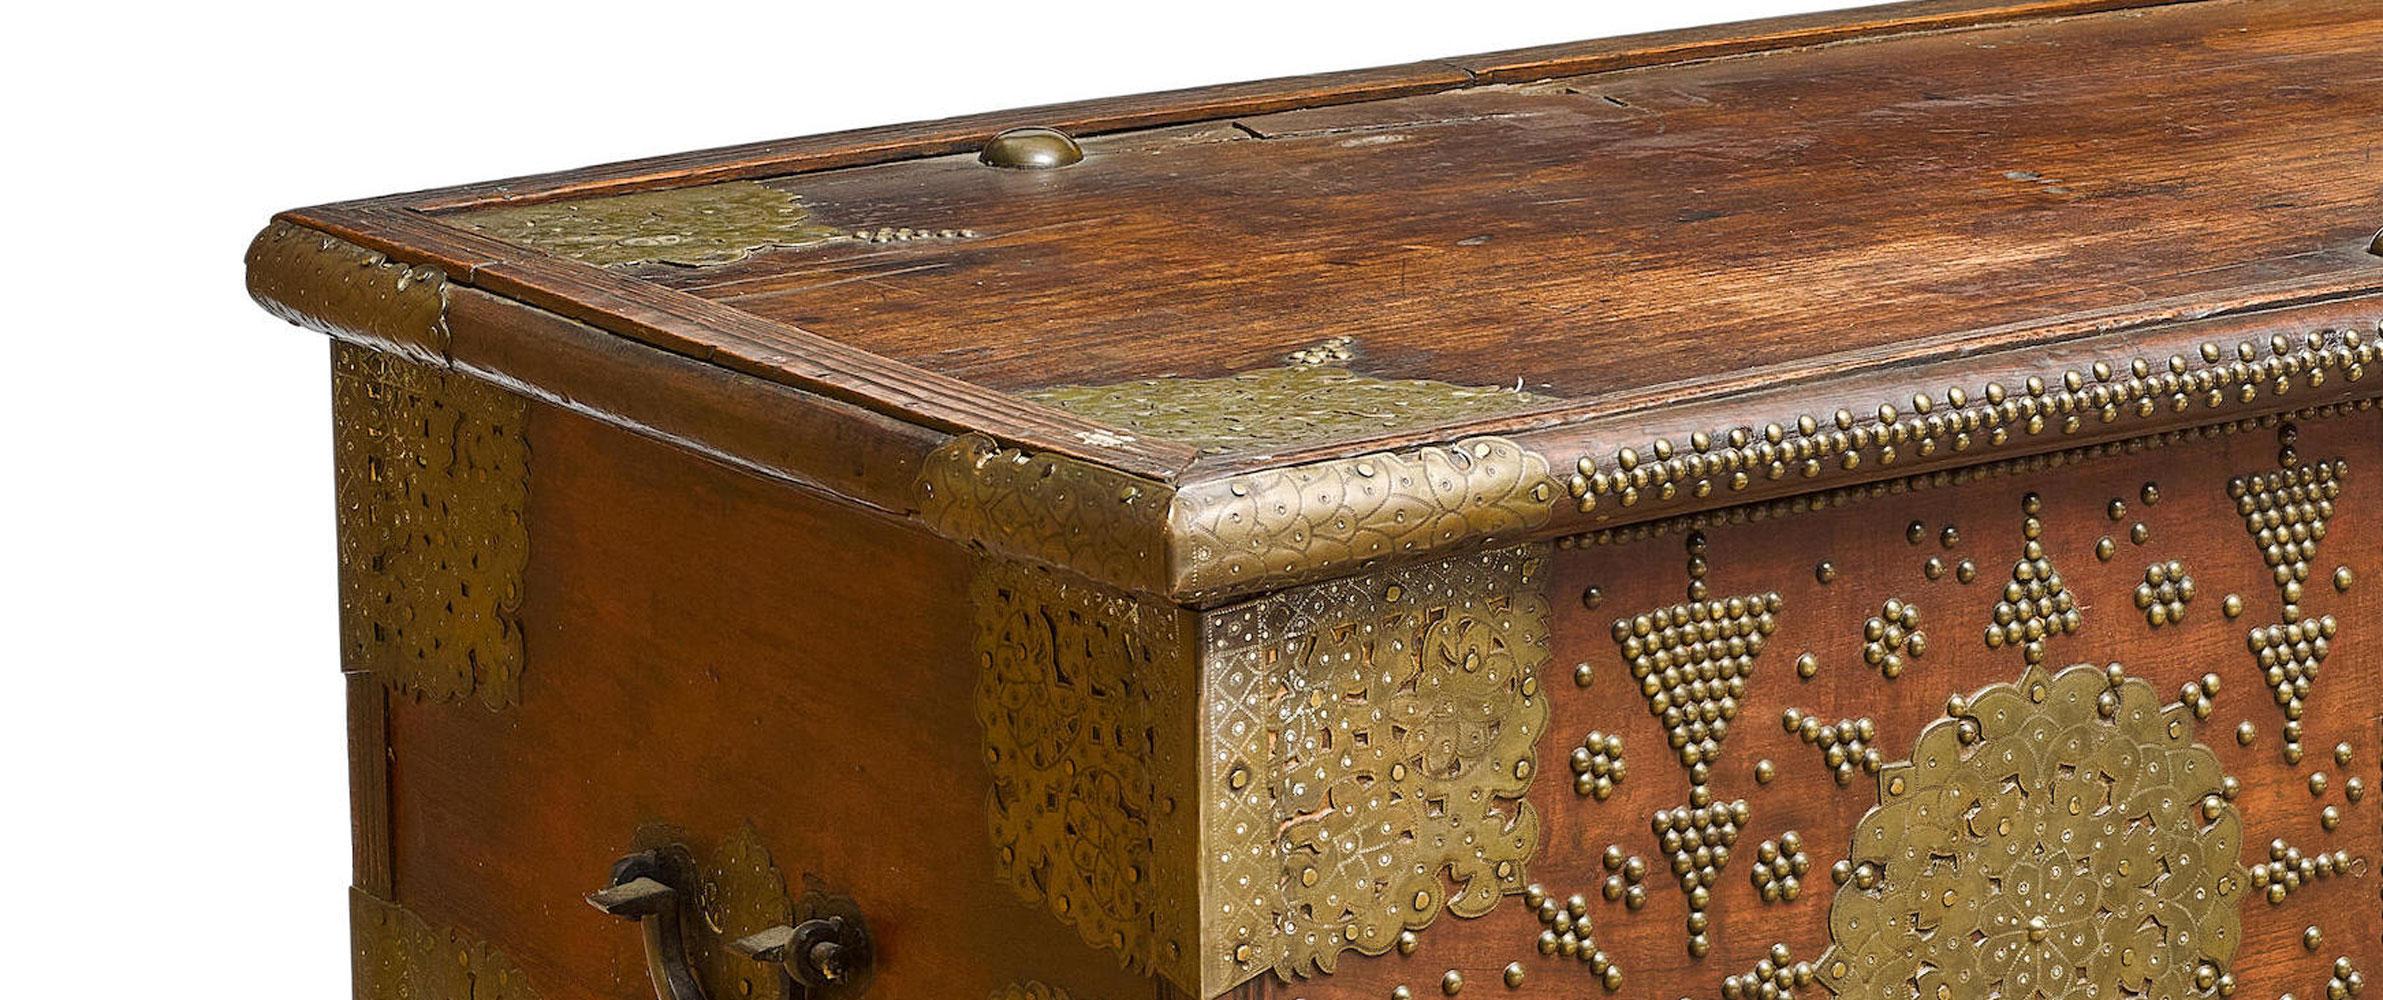 Hand-Carved Indian Brass Mounted Stained Hardwood Box, India, Circa 1850 For Sale